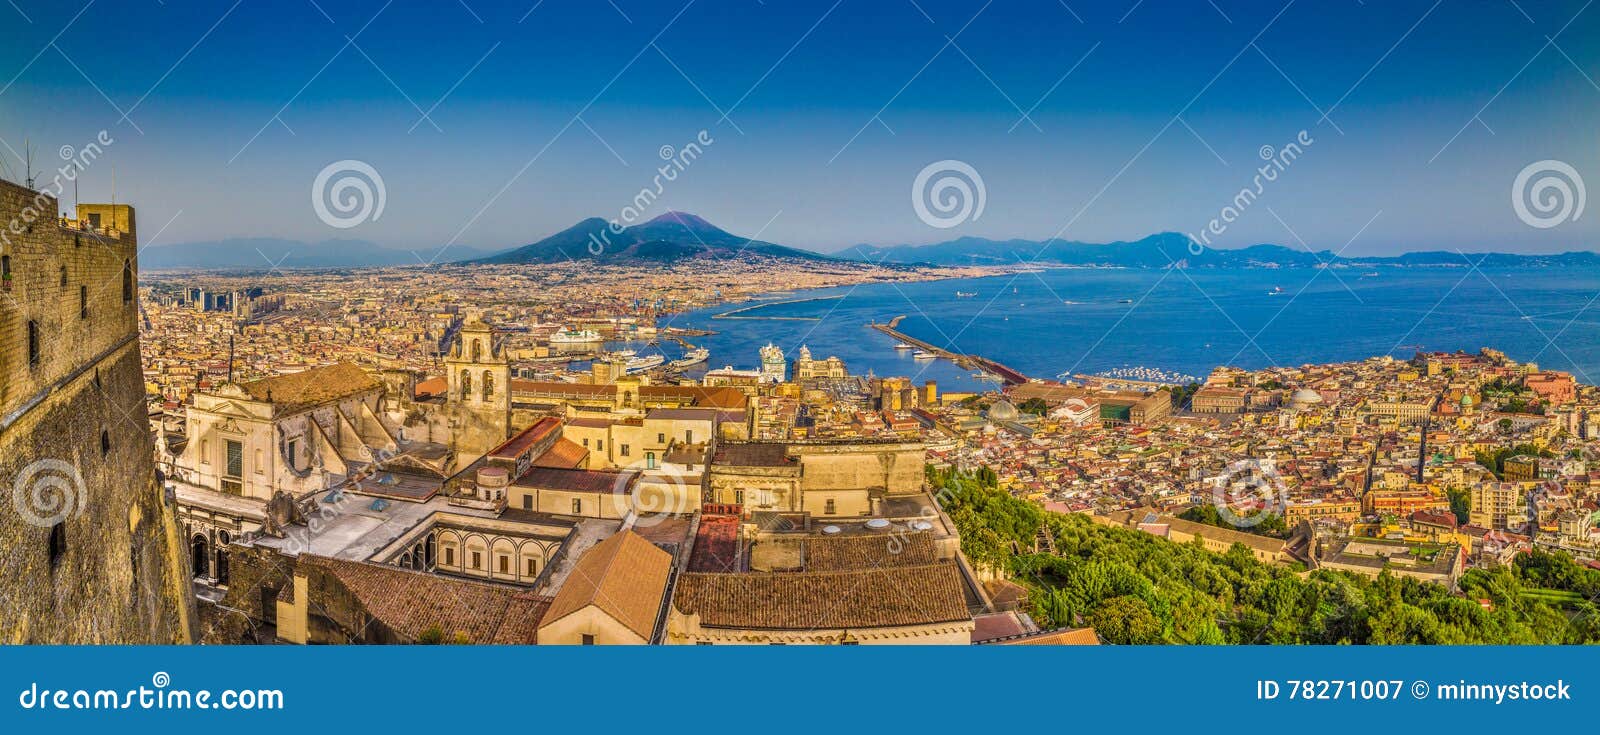 city of naples with mt. vesuvius at sunset, campania, italy